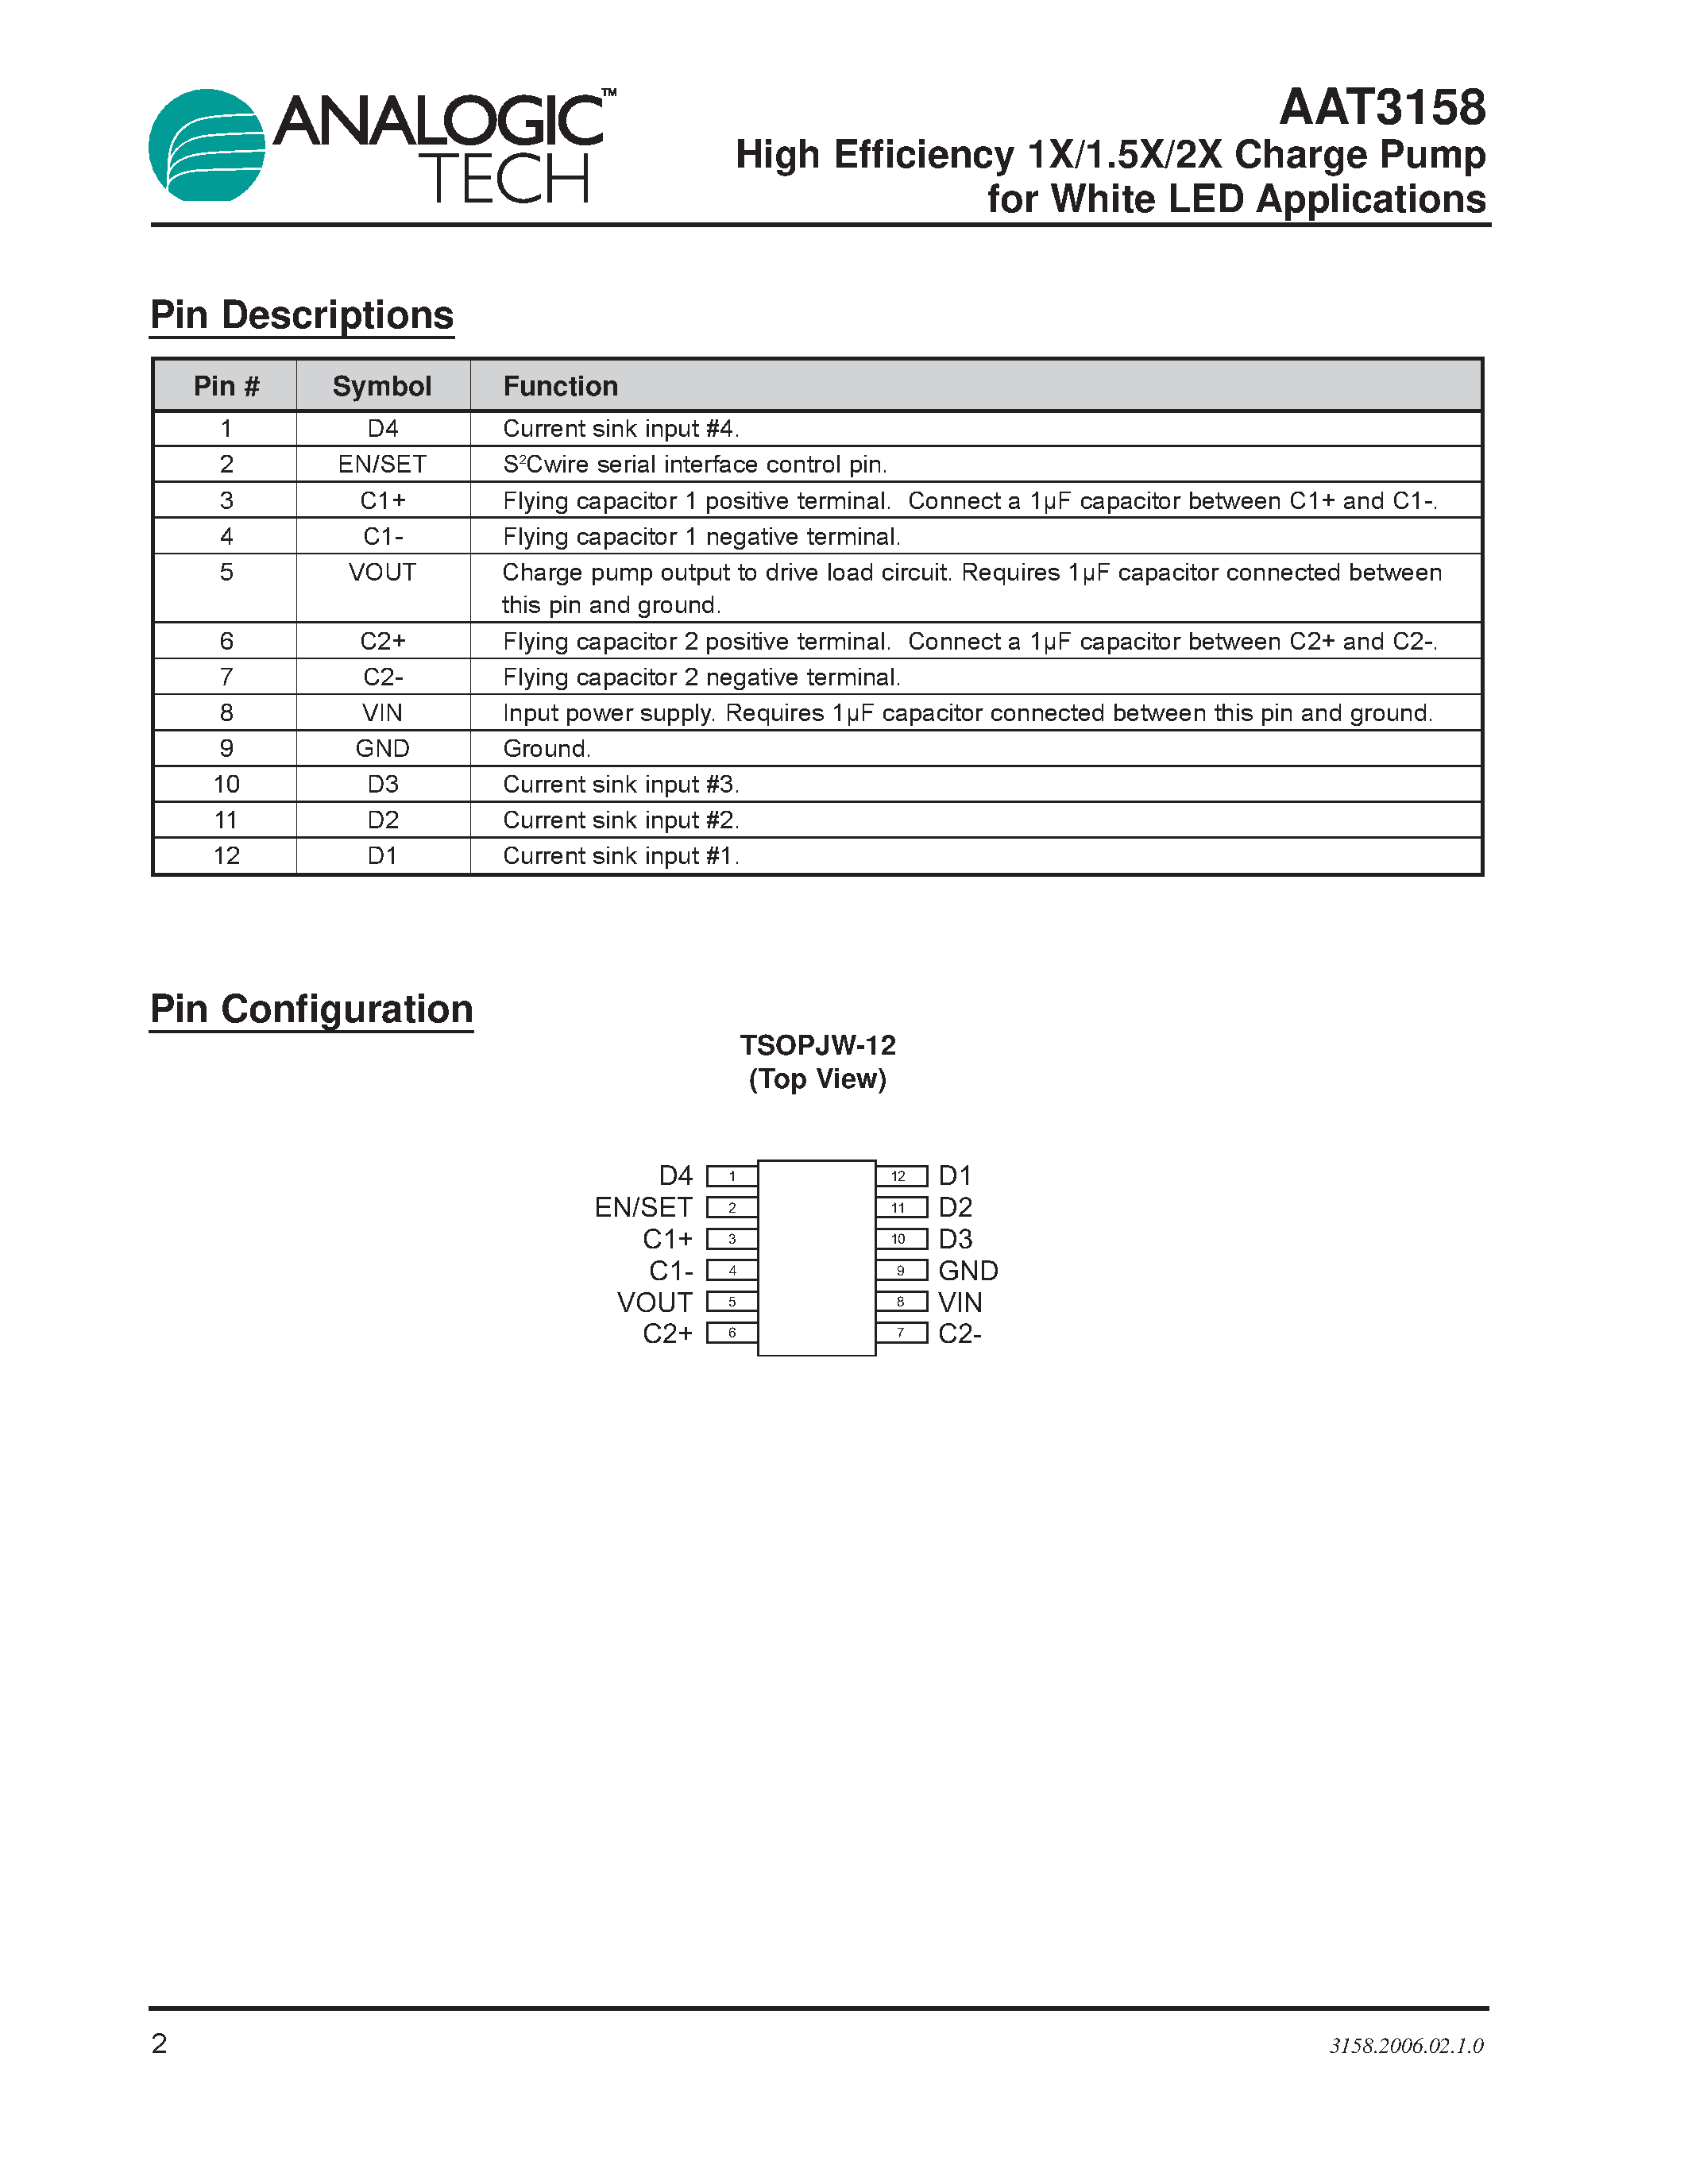 Datasheet AAT3158 - High Efficiency 1X/1.5X/2X Charge Pump page 2